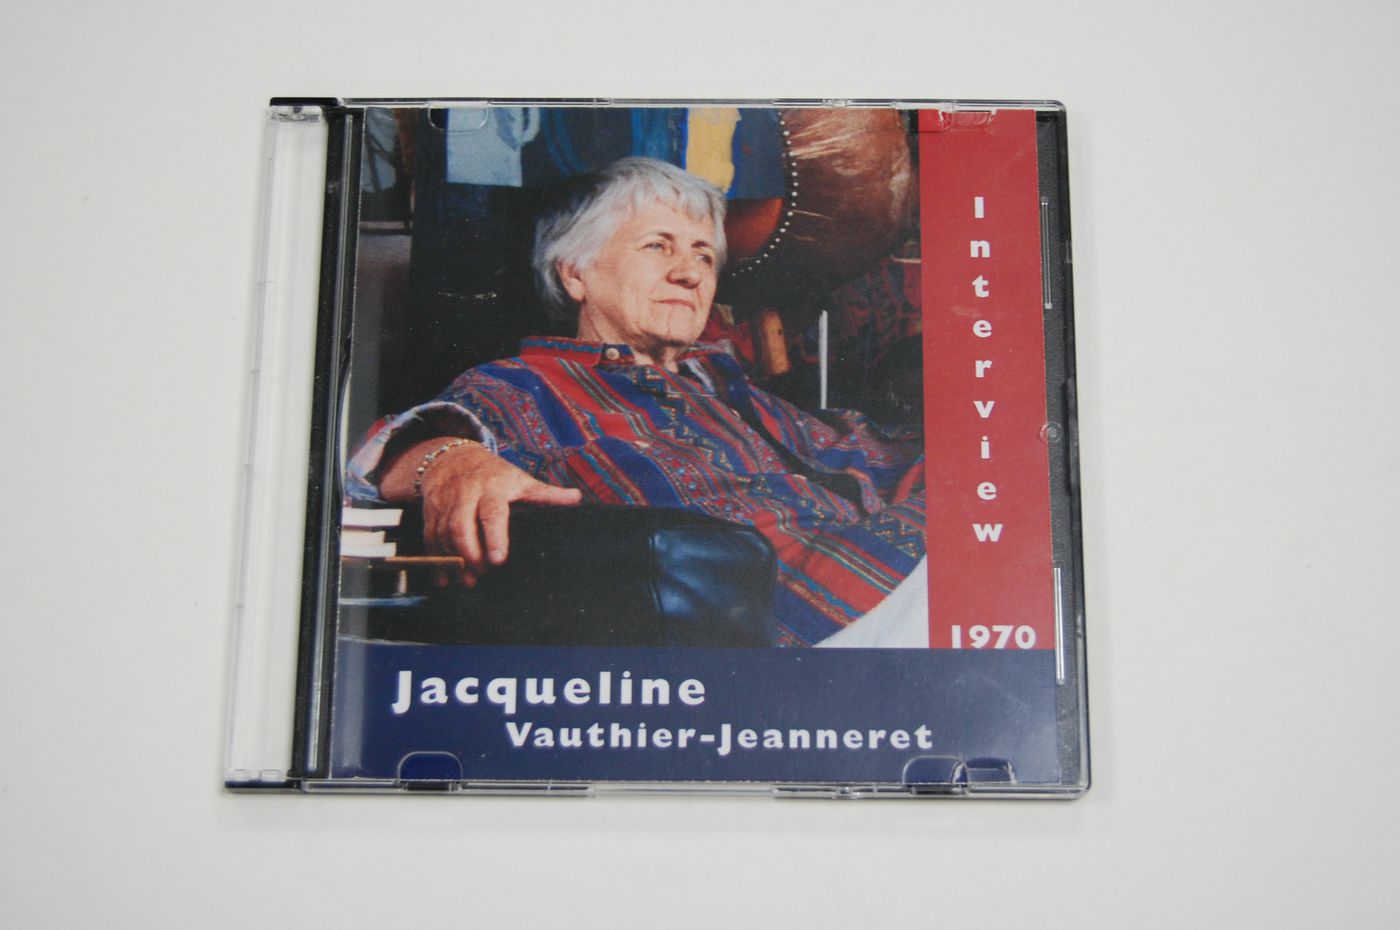 Radio interview of Jacqueline Jeanneret in 1970